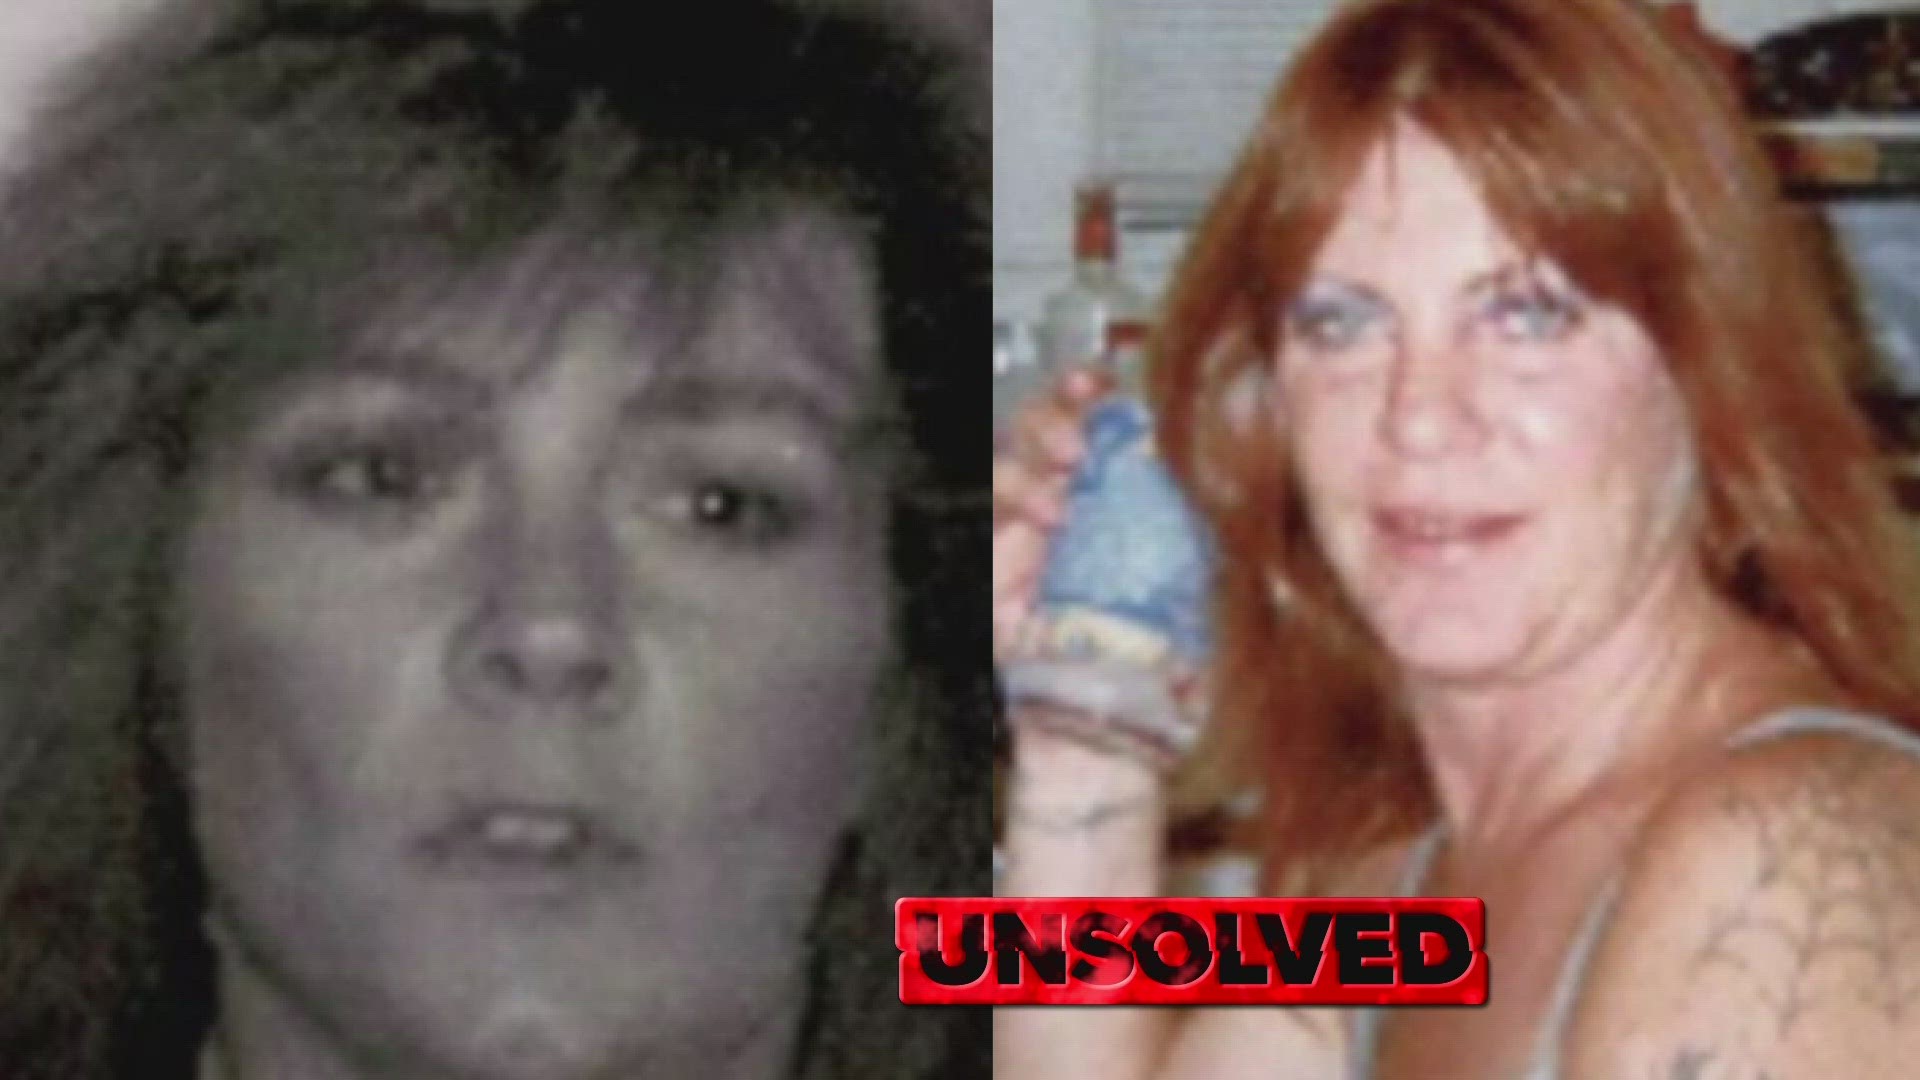 Two women killed in a similar fashion just two years apart. But the question is, who pulled the trigger?